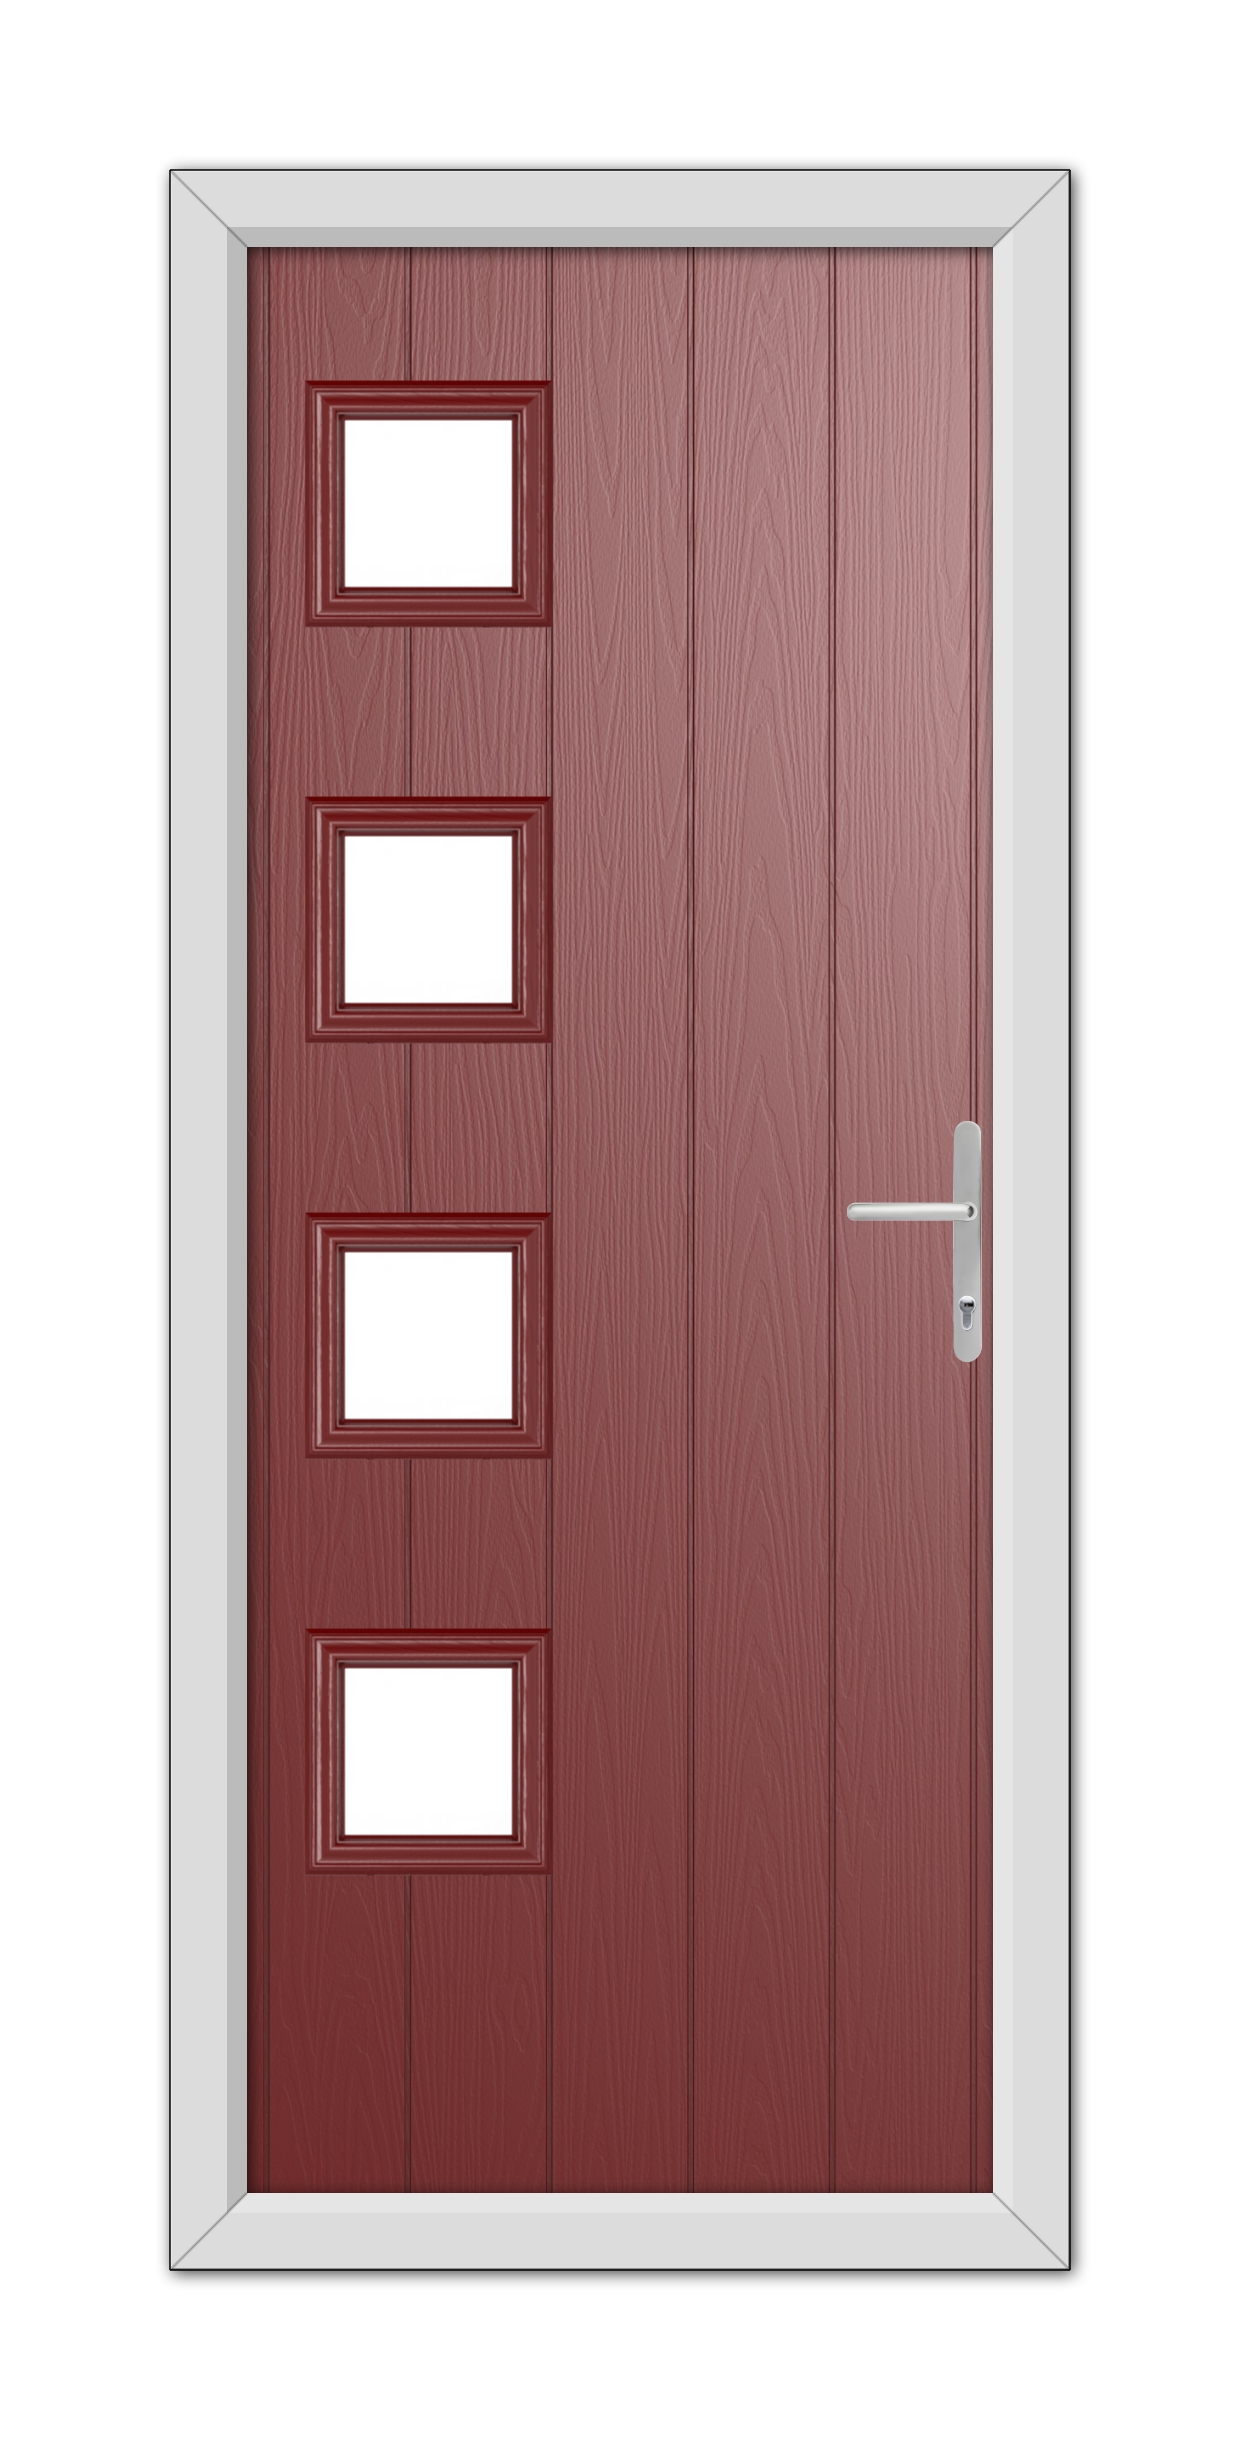 A contemporary Red Sussex Composite Door 48mm Timber Core featuring four rectangular windows and a modern handle, set within a white frame.